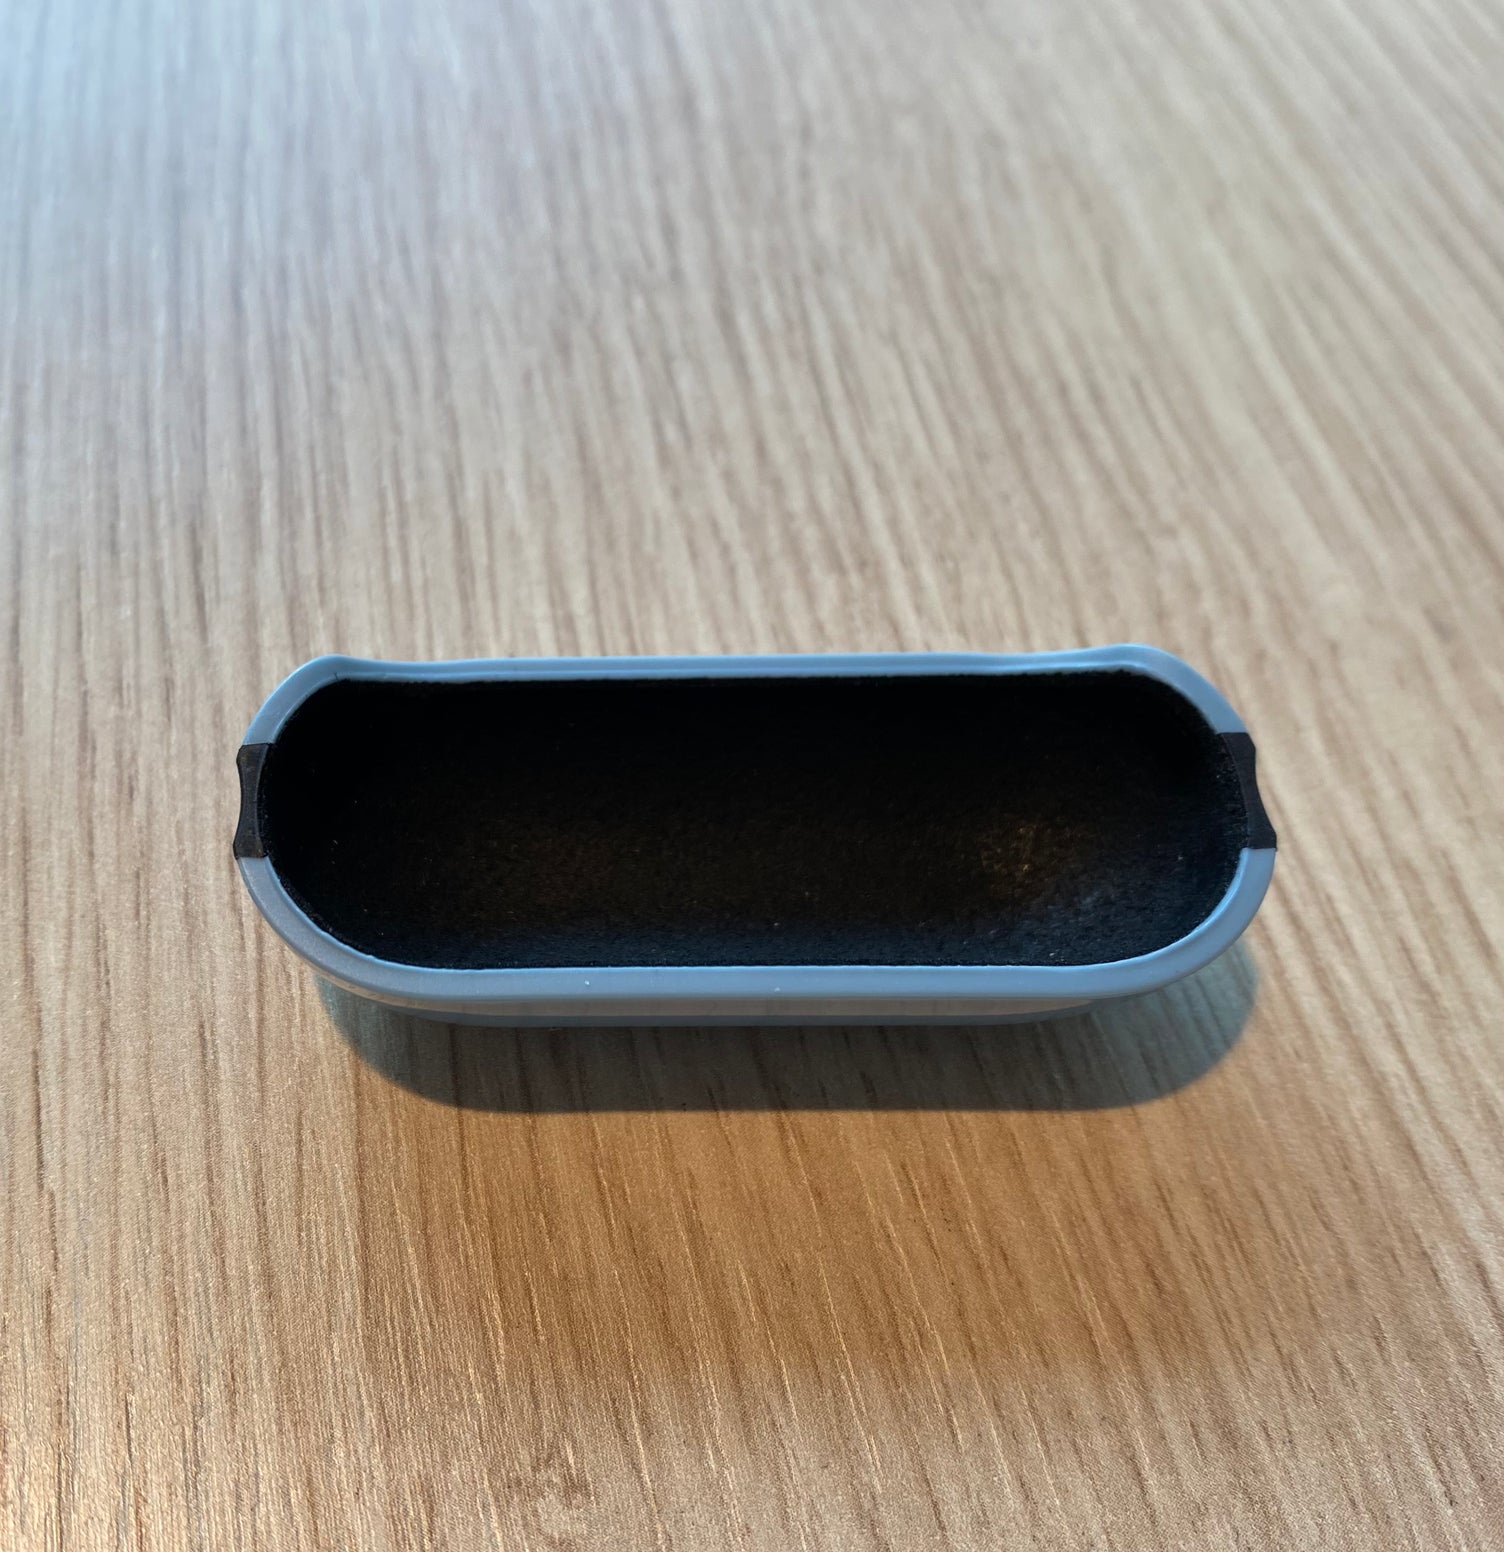 Nomad Sport Case for AirPods Pro (2nd Gen) - Marine Blue - Open Box